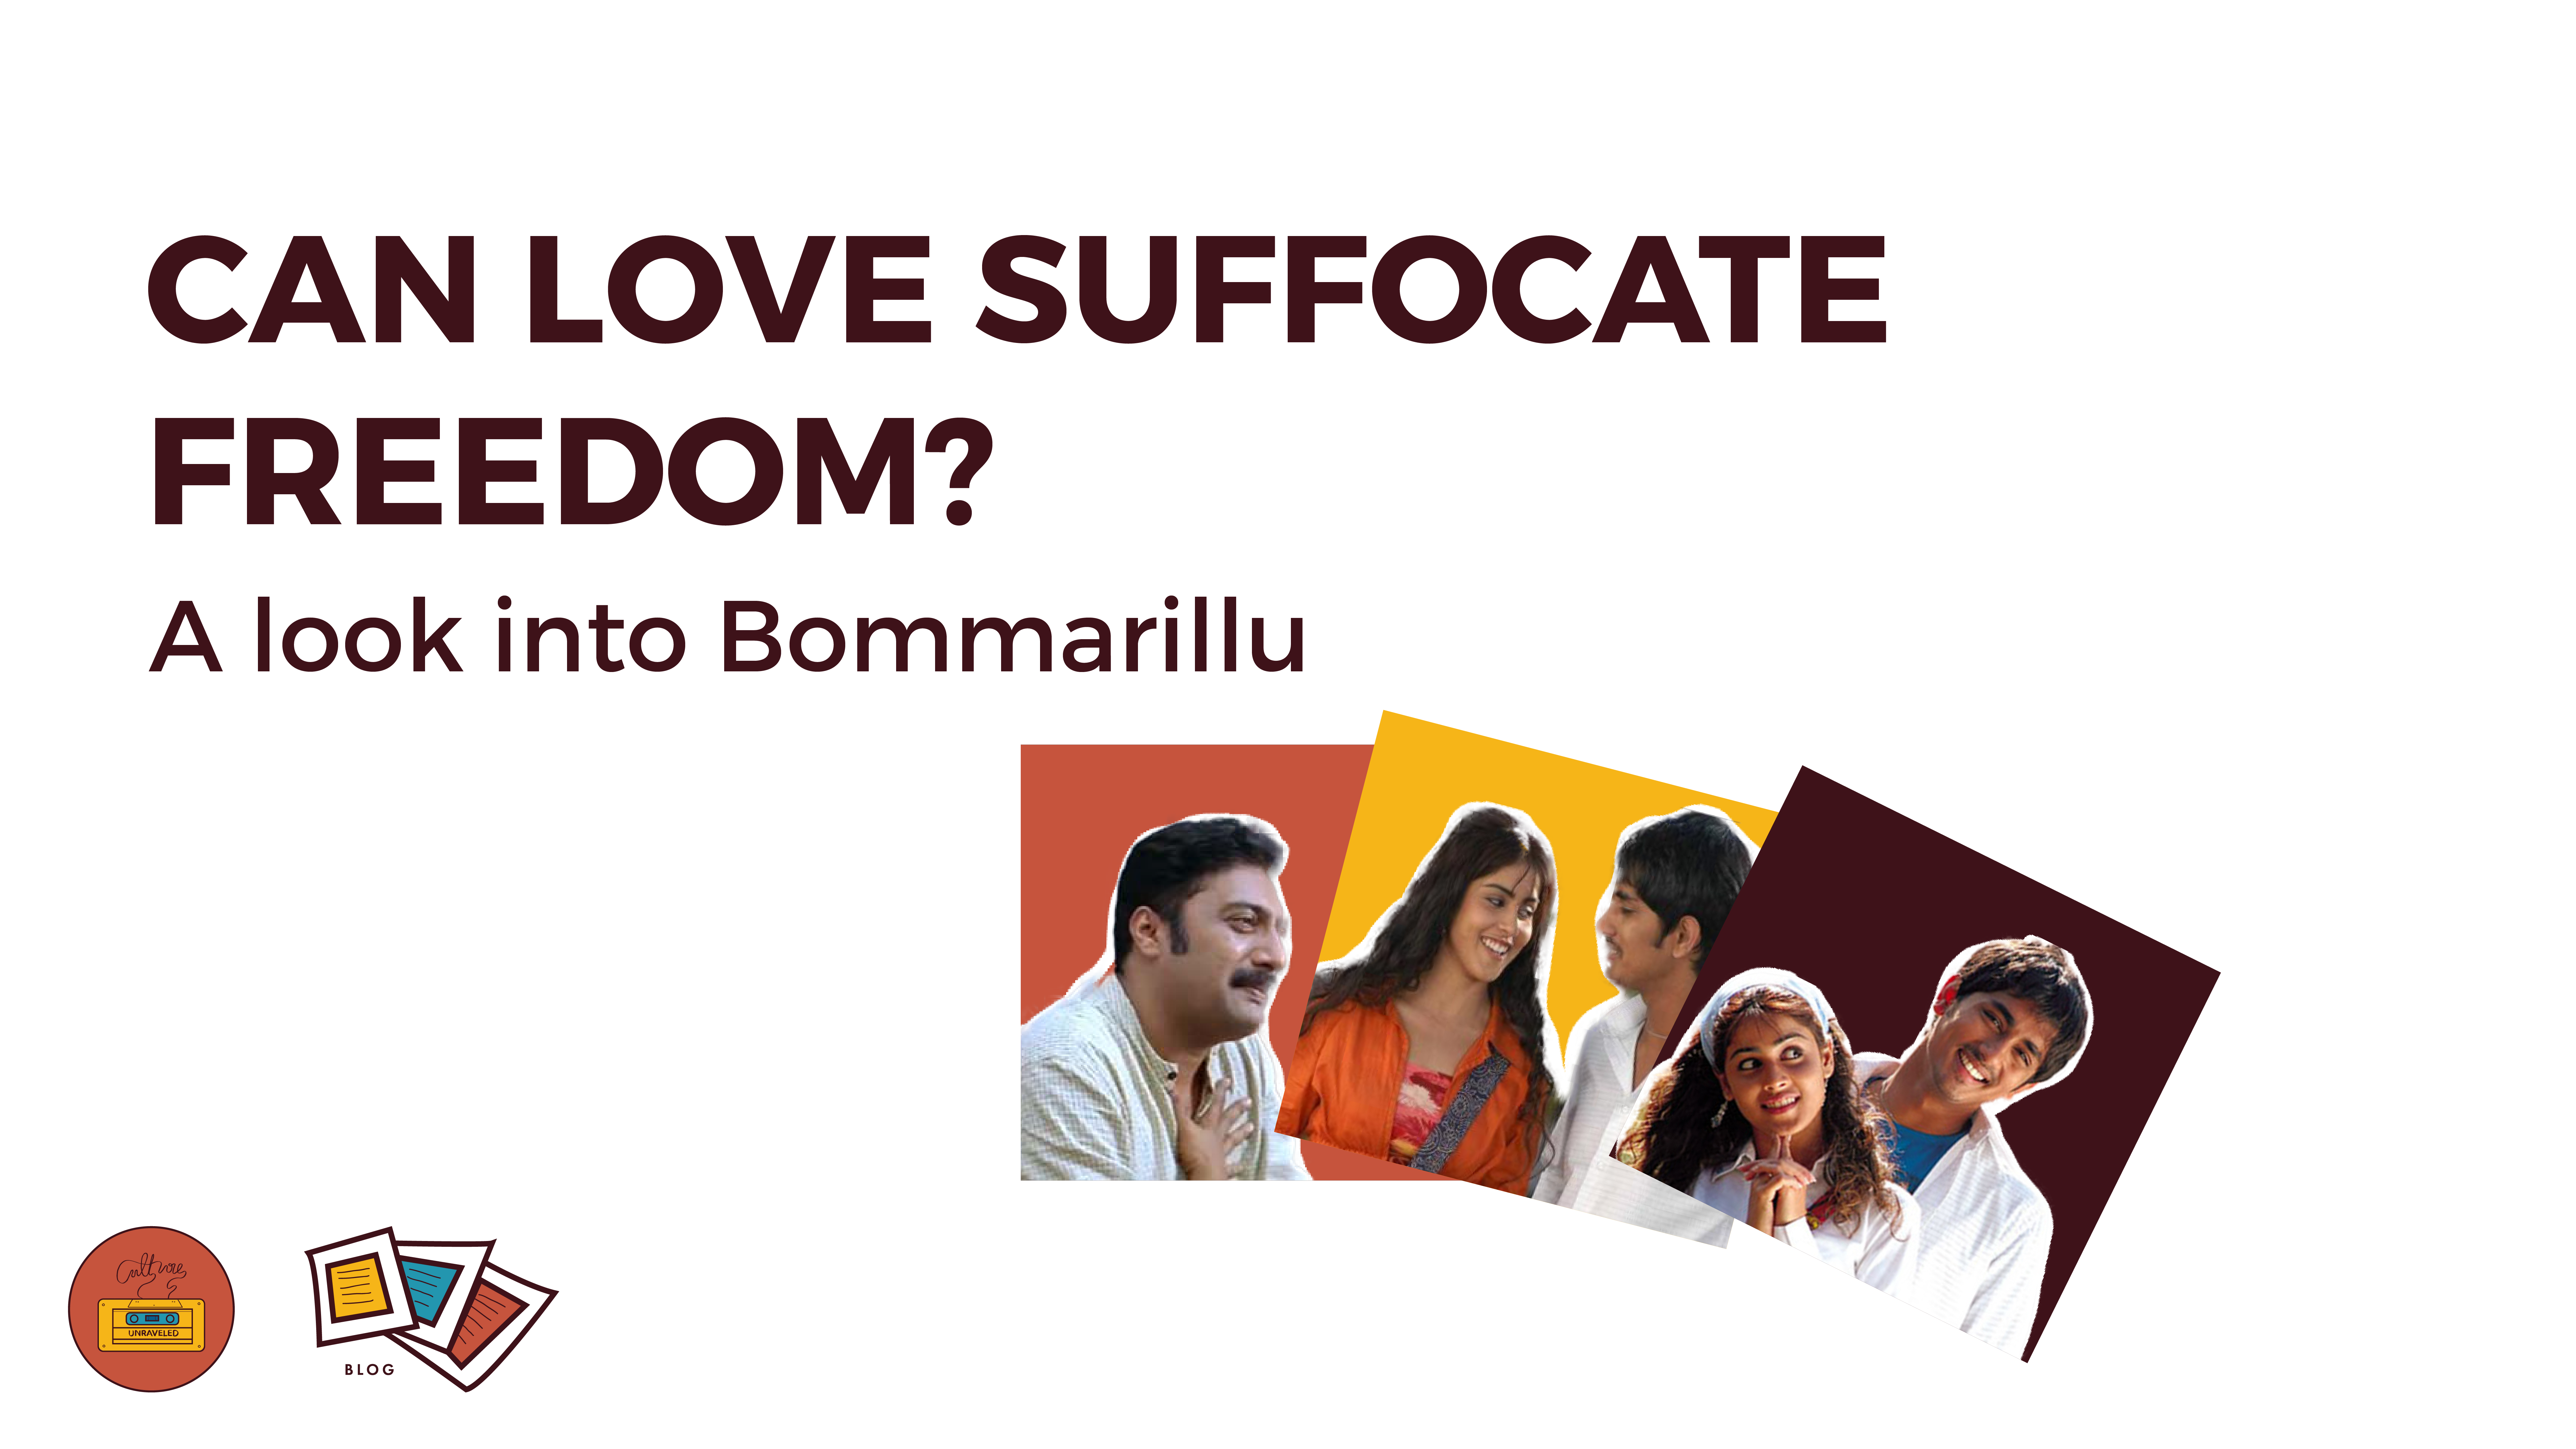 Can love suffocate freedom? A look into Bommarillu